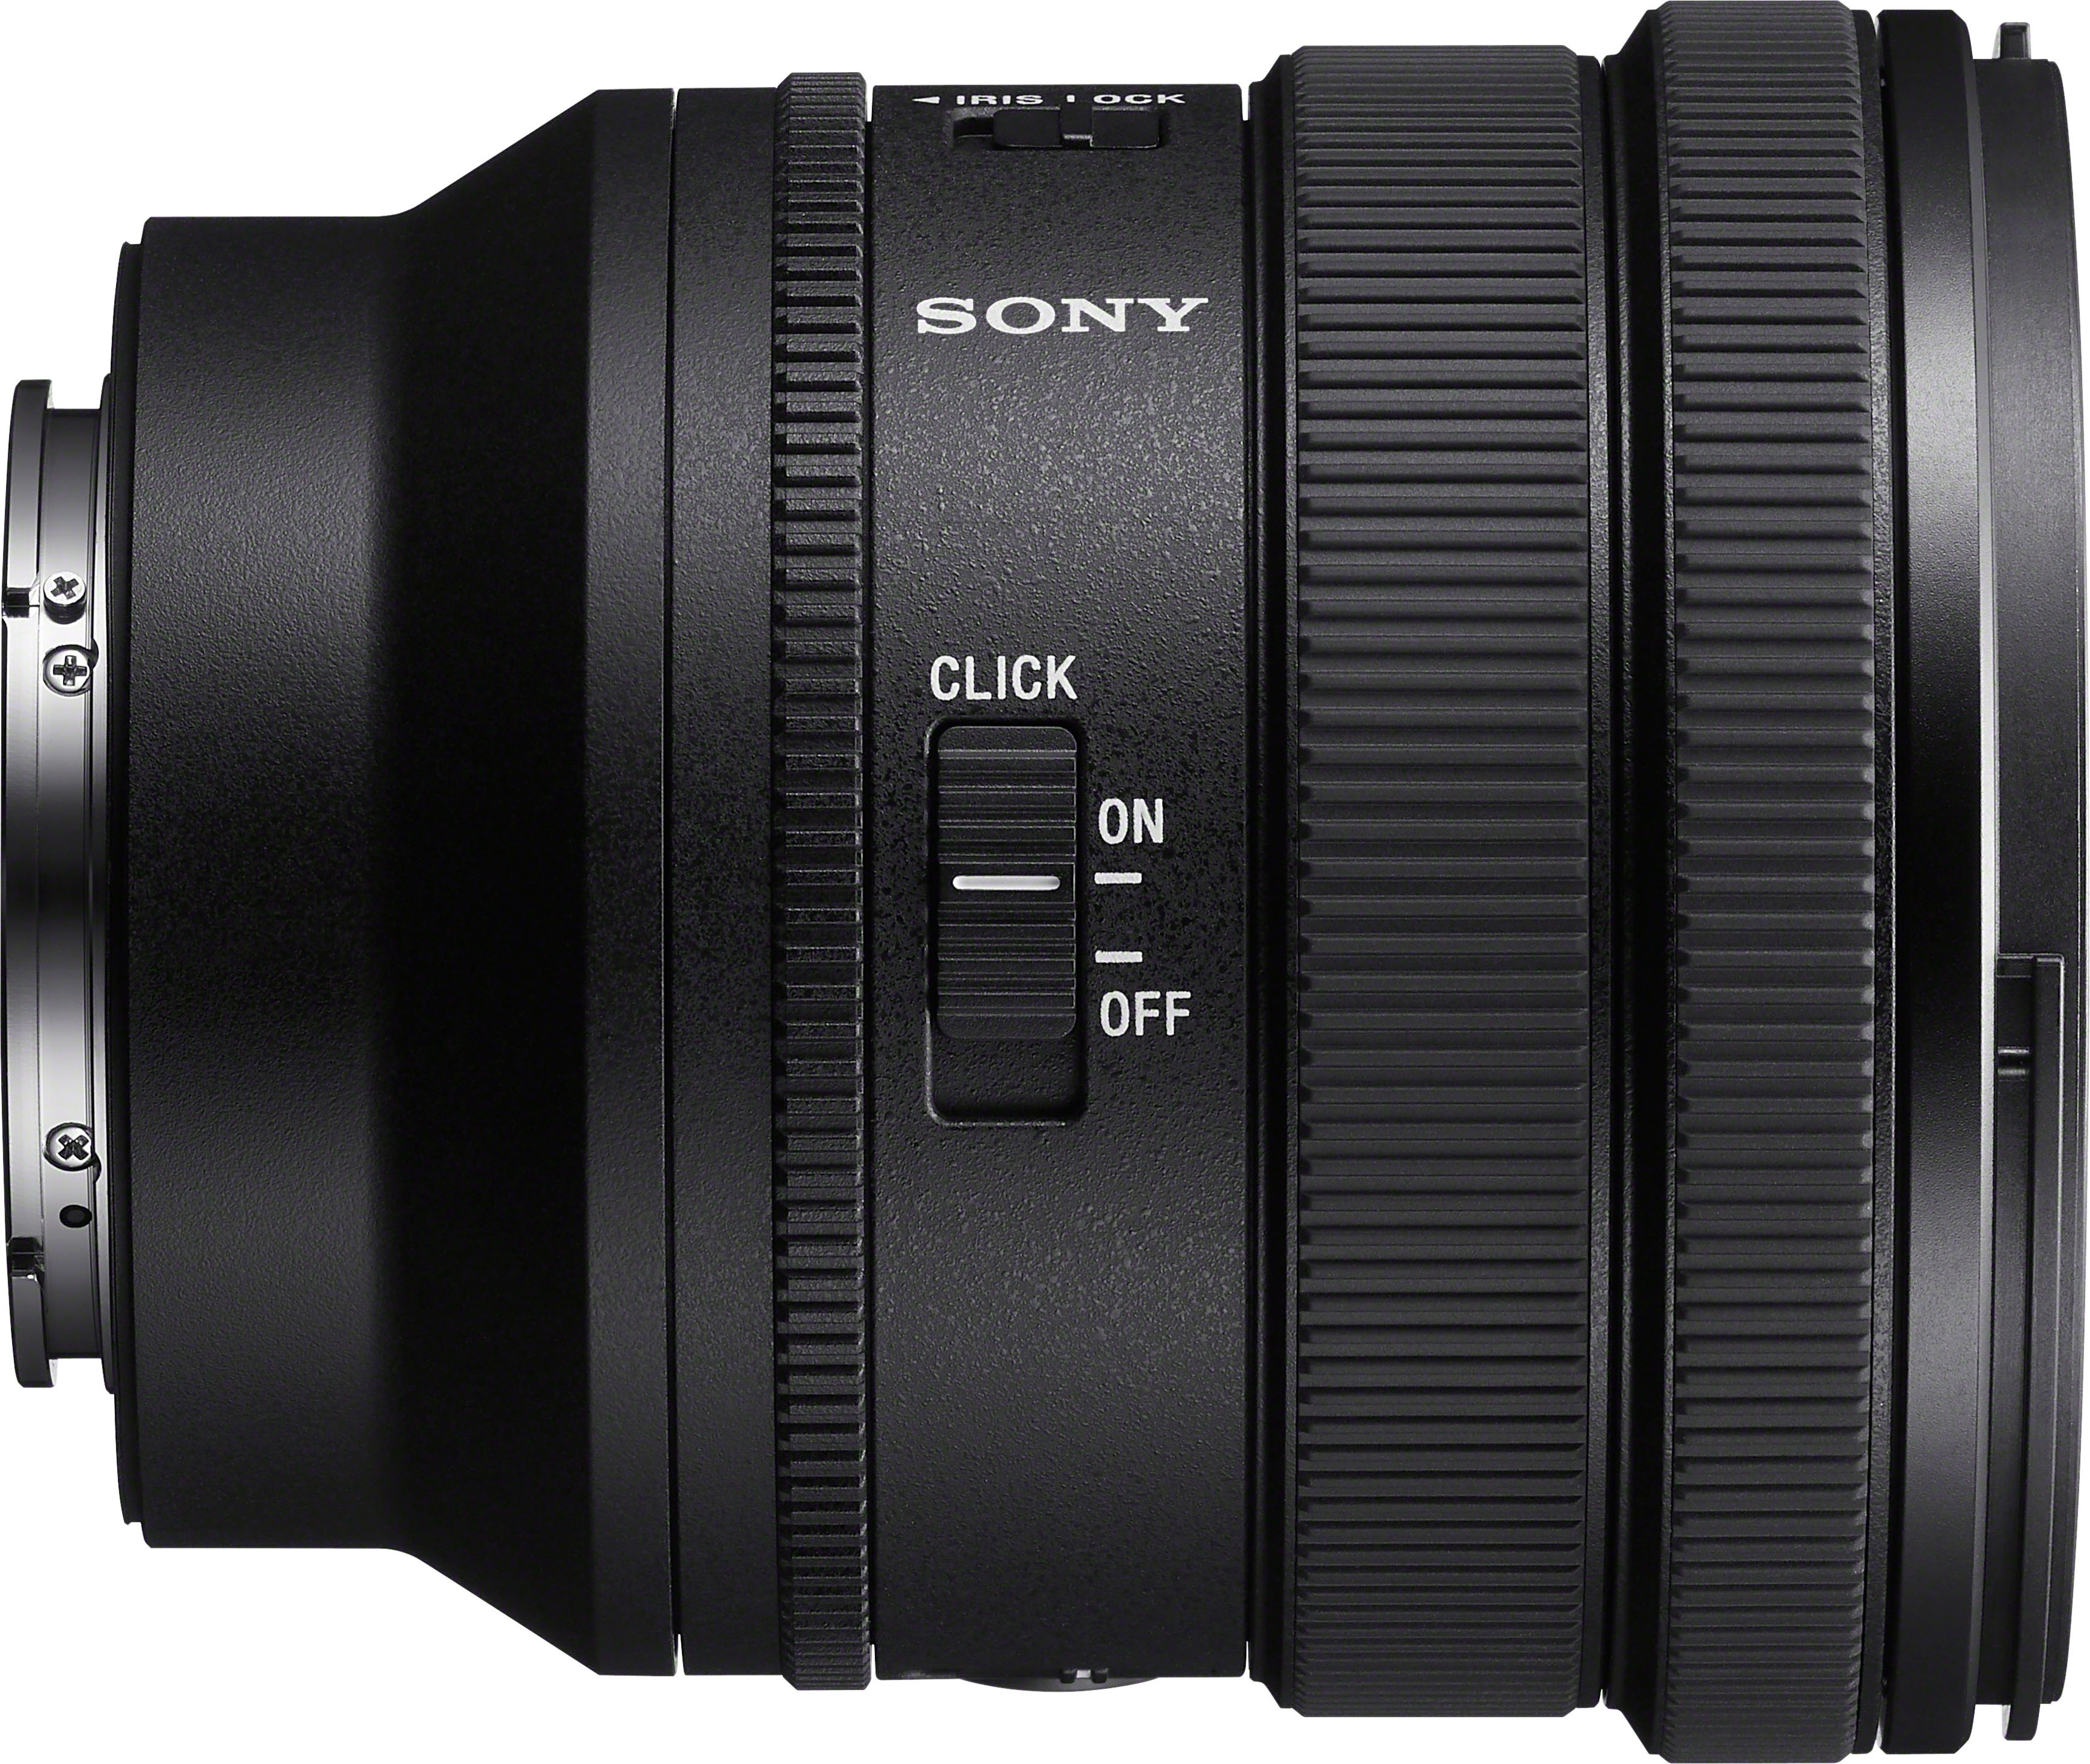 Take a Walk on the Wide Side with Sony's FE PZ 16-35mm f/4 G Lens